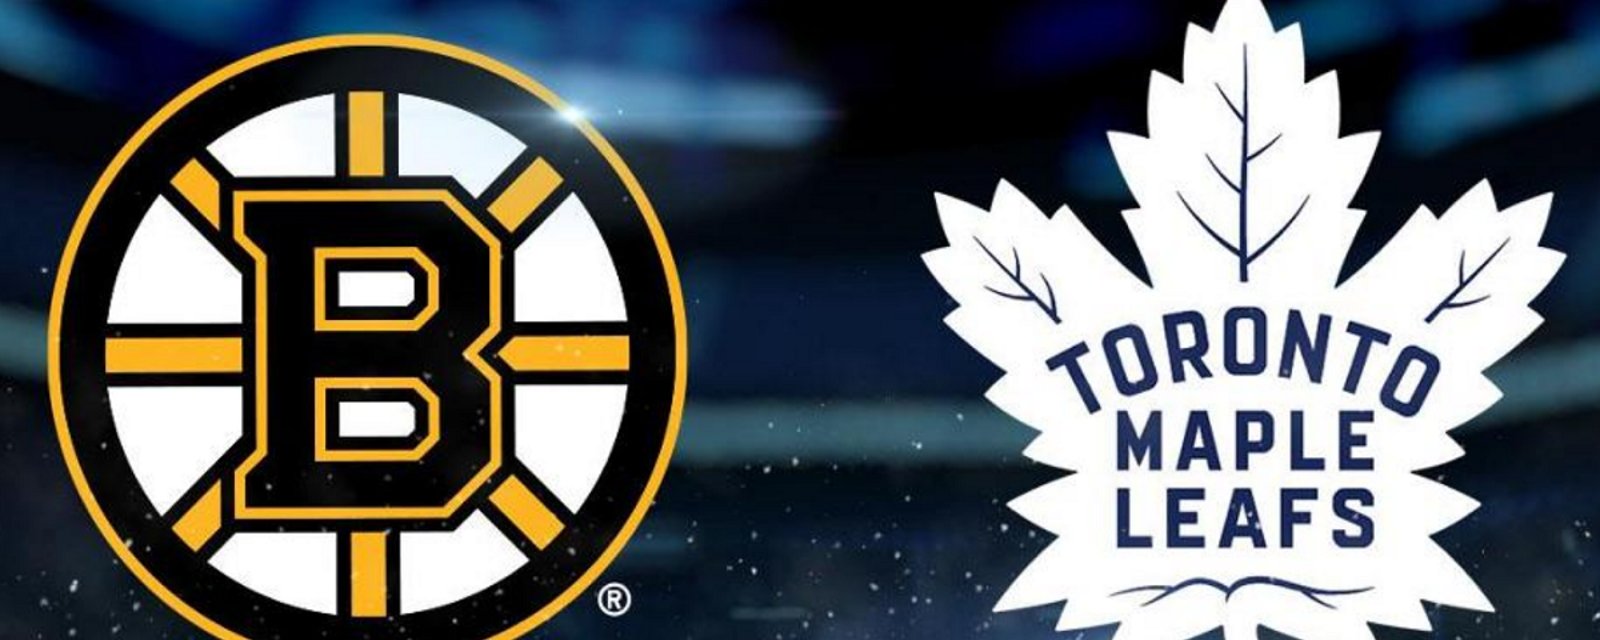 Full lineups for both Bruins and Maple Leafs in Game 4.